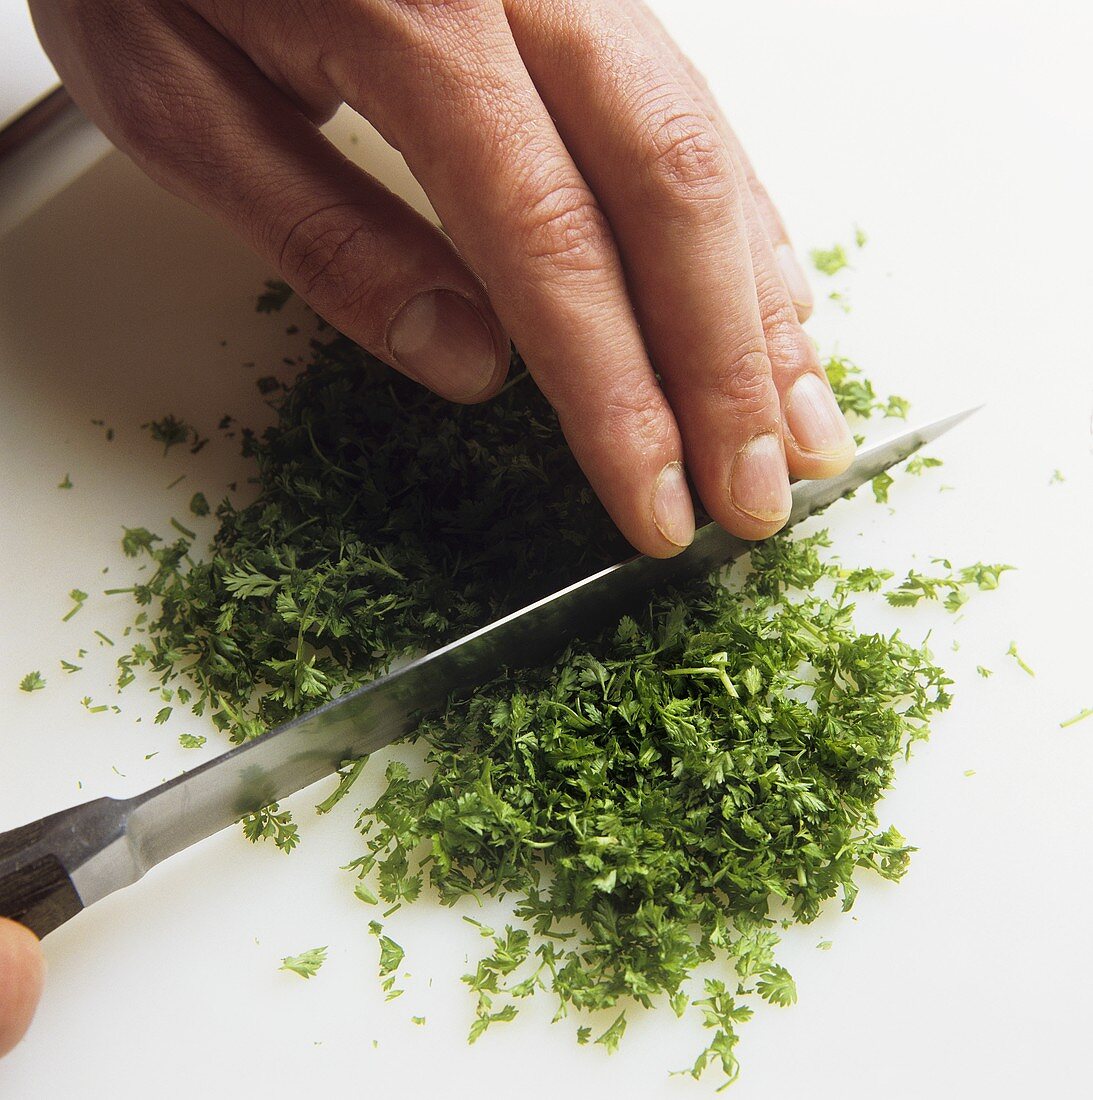 Finely chopping chervil with a knife